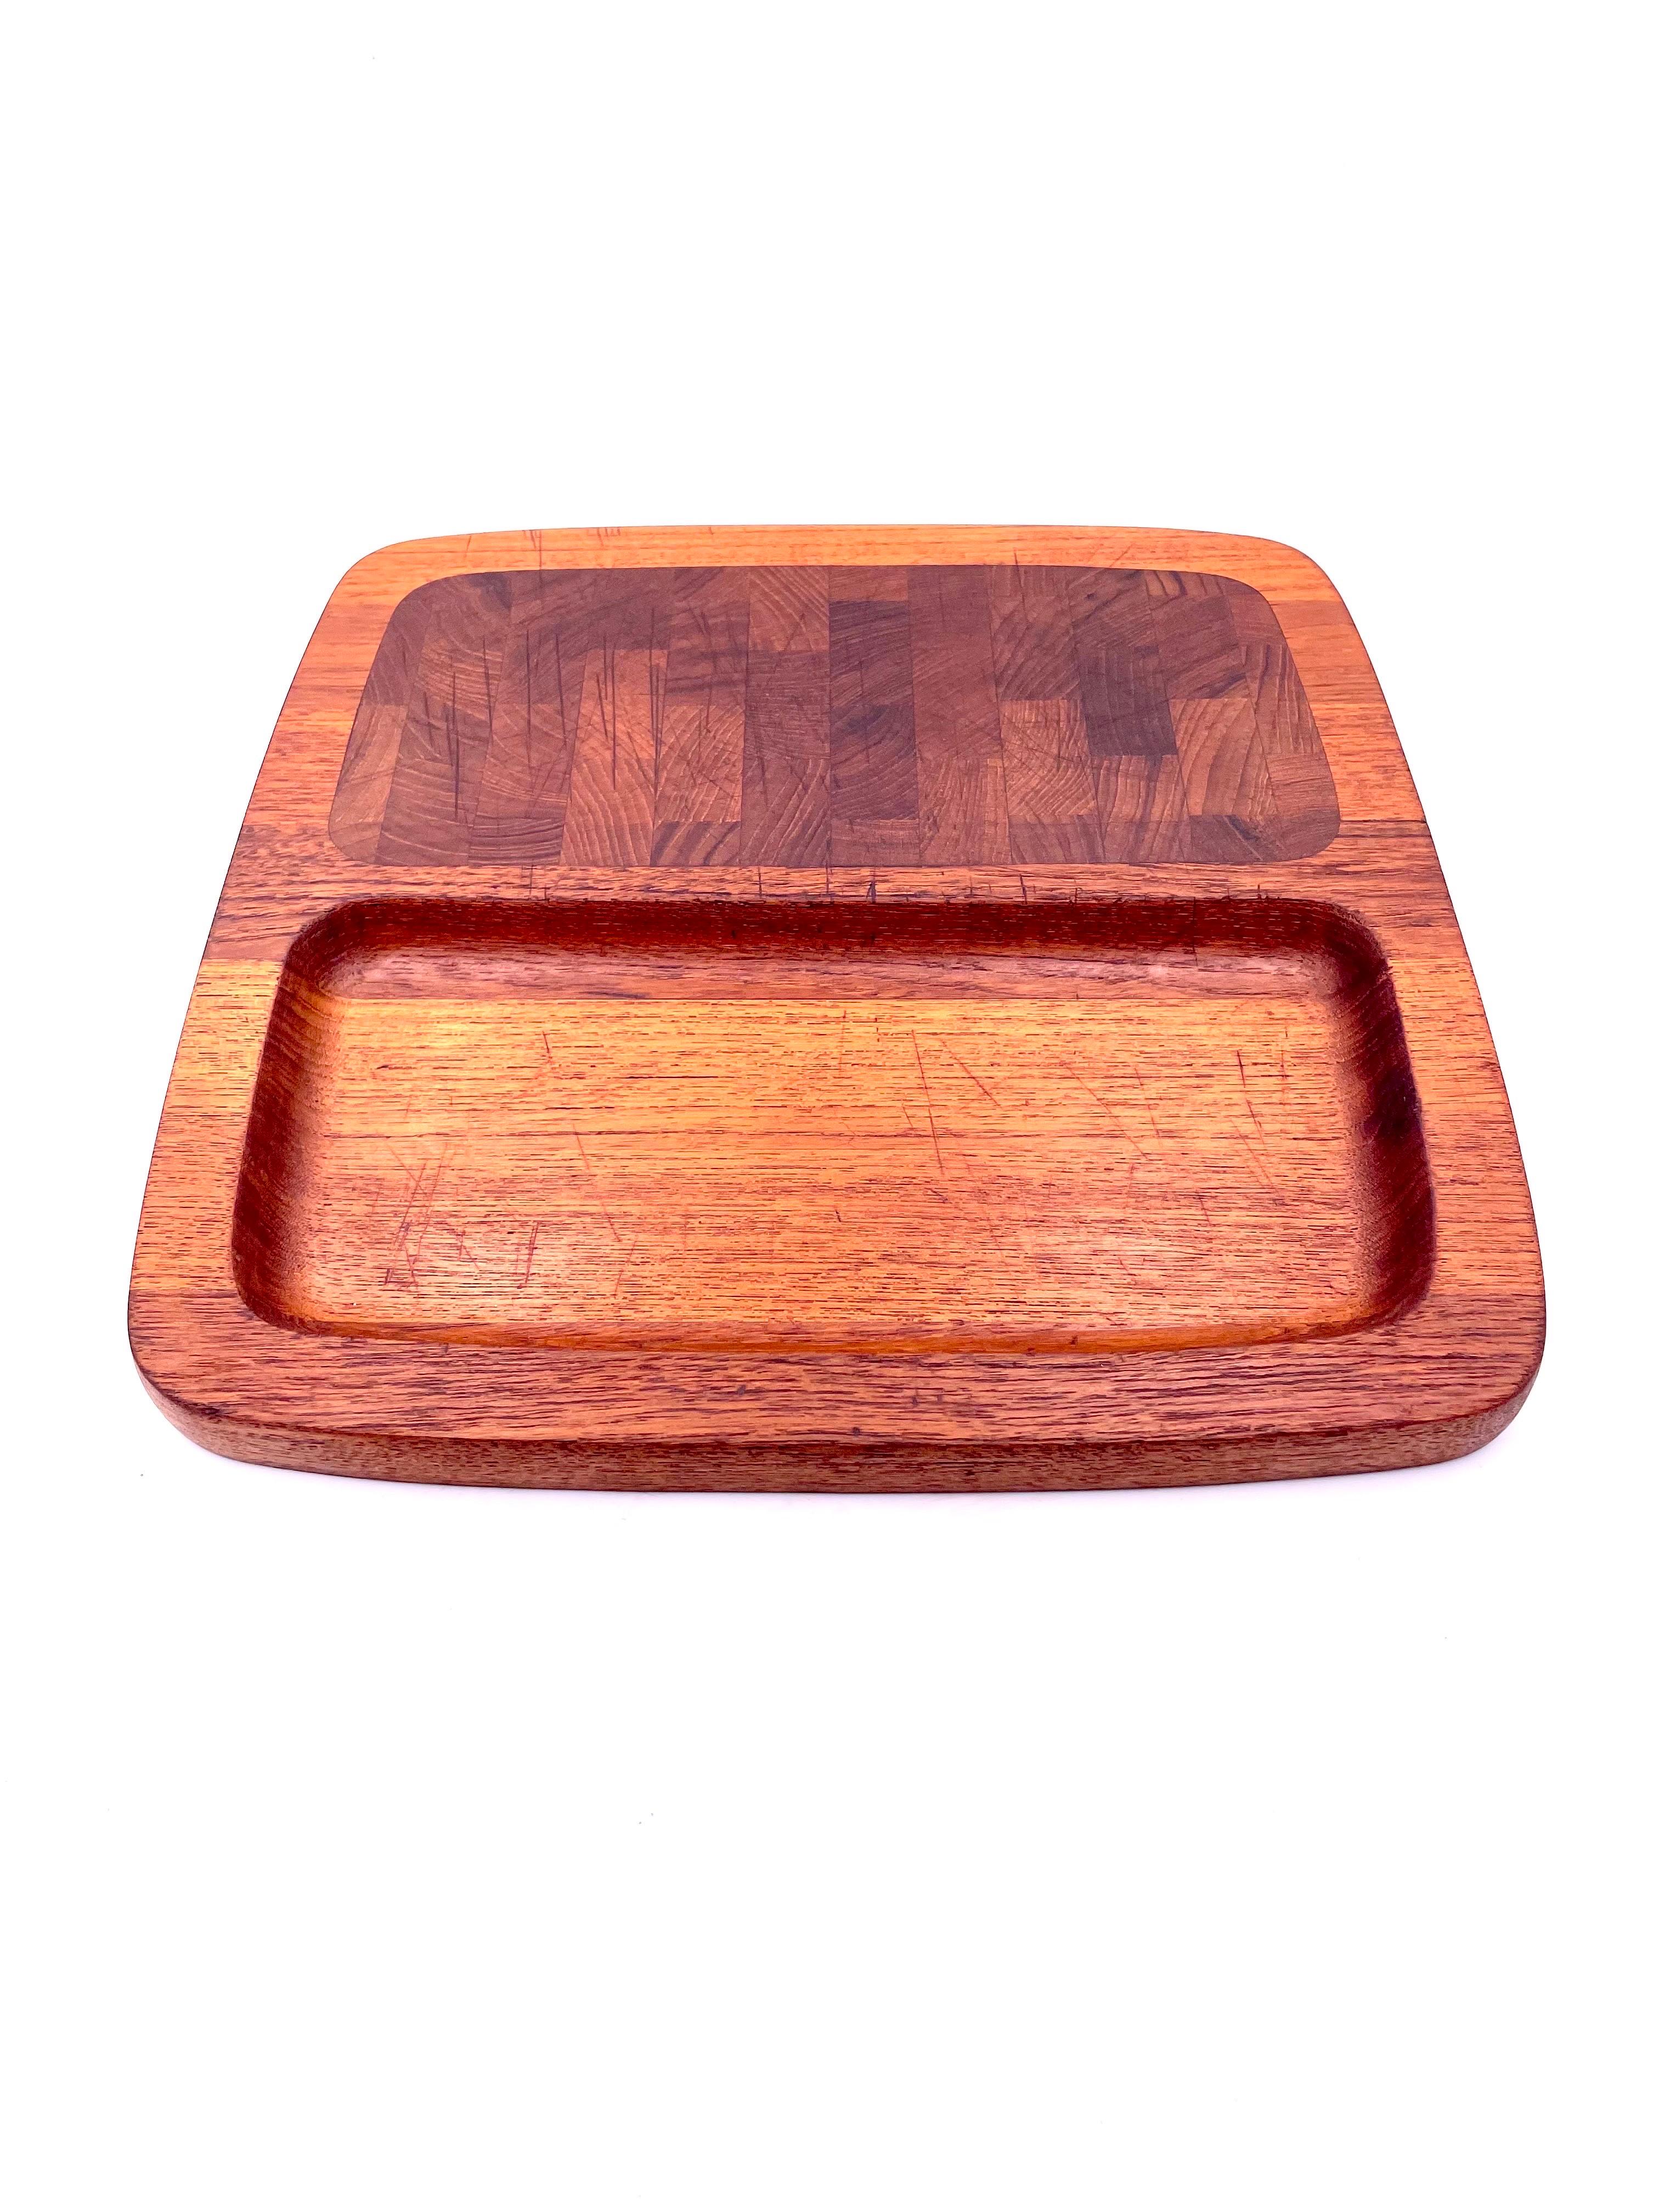 Danish Modern Solid Teak Cheese and Crackers Tray by Dansk Quistgaard In Good Condition For Sale In San Diego, CA